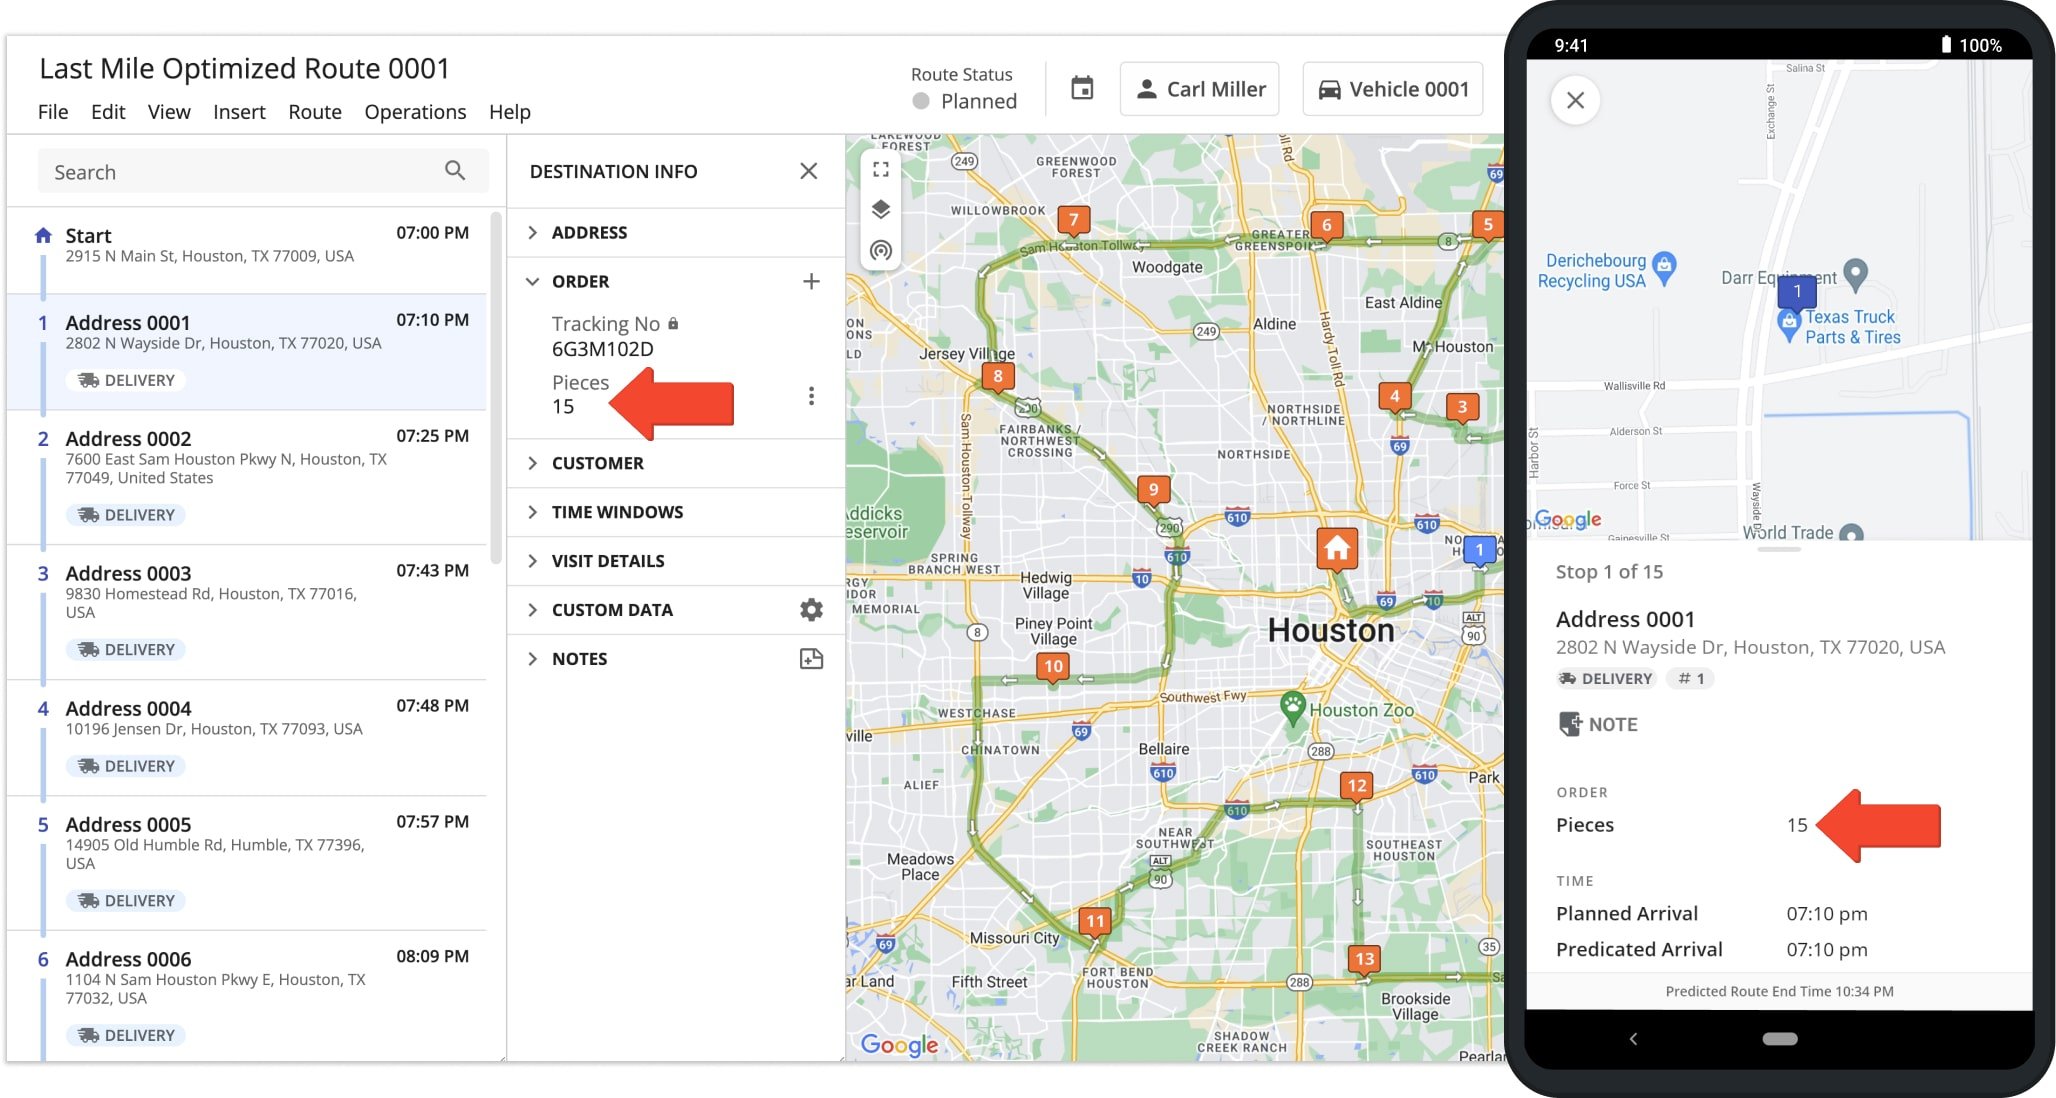 Changes made to routes or route destinations, such as modifying the Pieces Business Rule for an address are automatically synched to the connected devices of all respective users associated with the route or main Route4Me account.